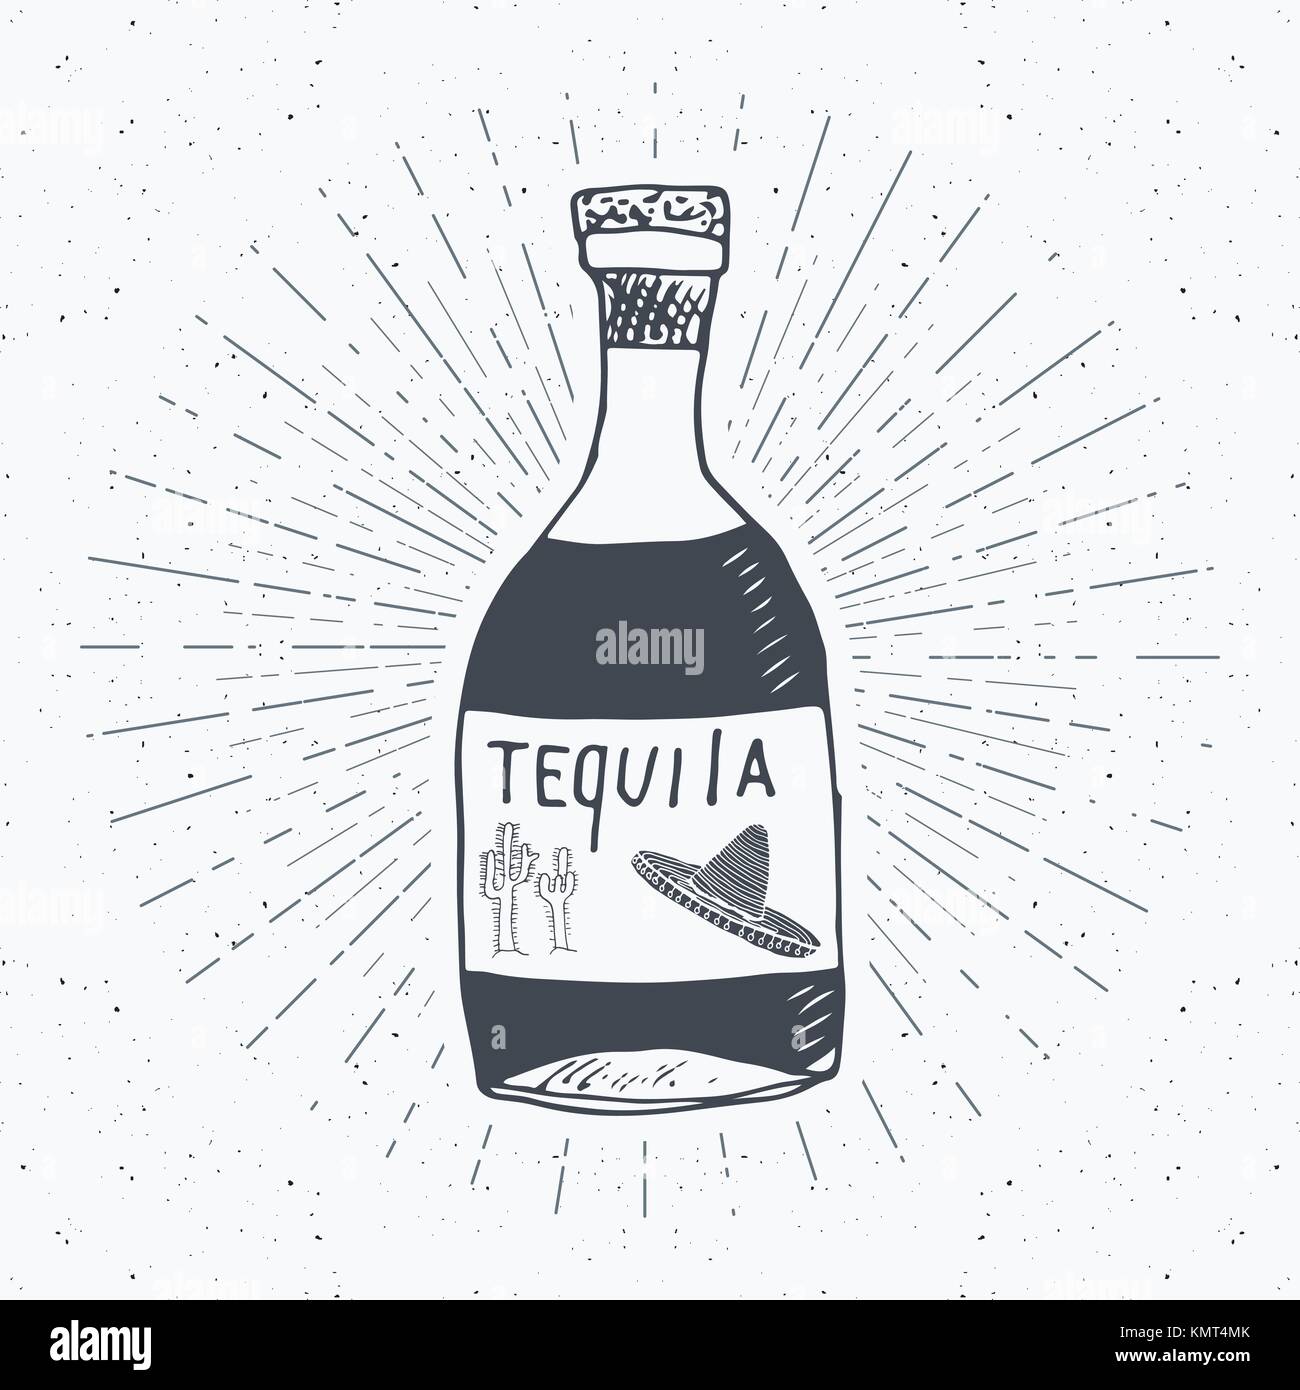 Vintage label, Hand drawn bottle of tequila mexican traditional alcohol drink sketch, grunge textured retro badge, emblem design, typography t-shirt p Stock Vector